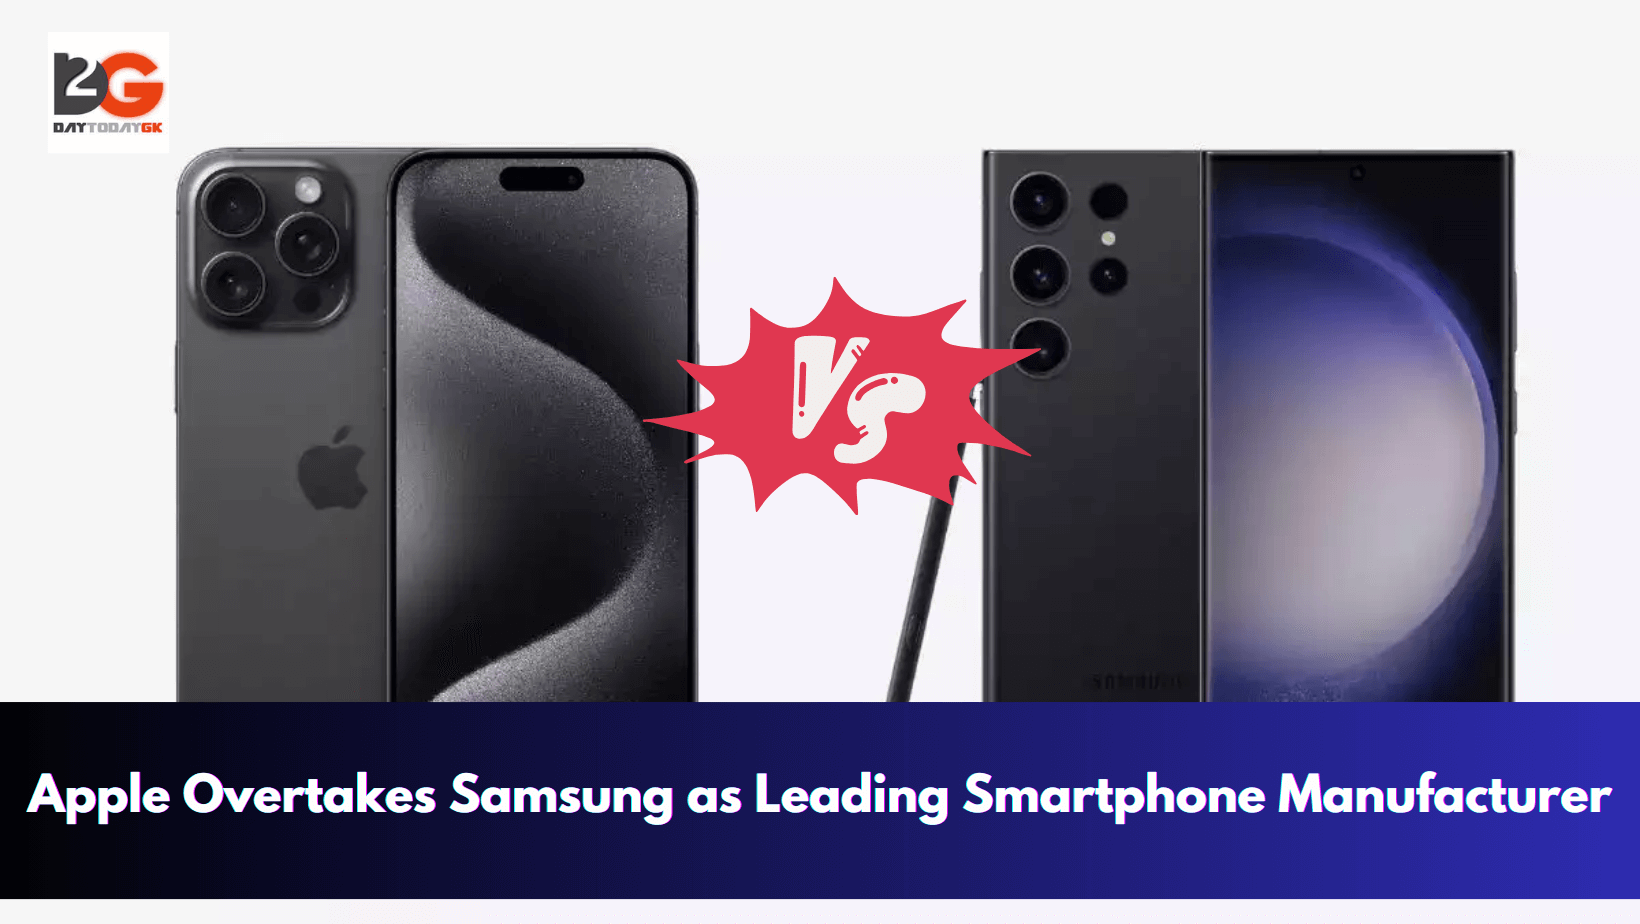 First Time Since 2010: Apple Overtakes Samsung as Leading Smartphone Manufacturer